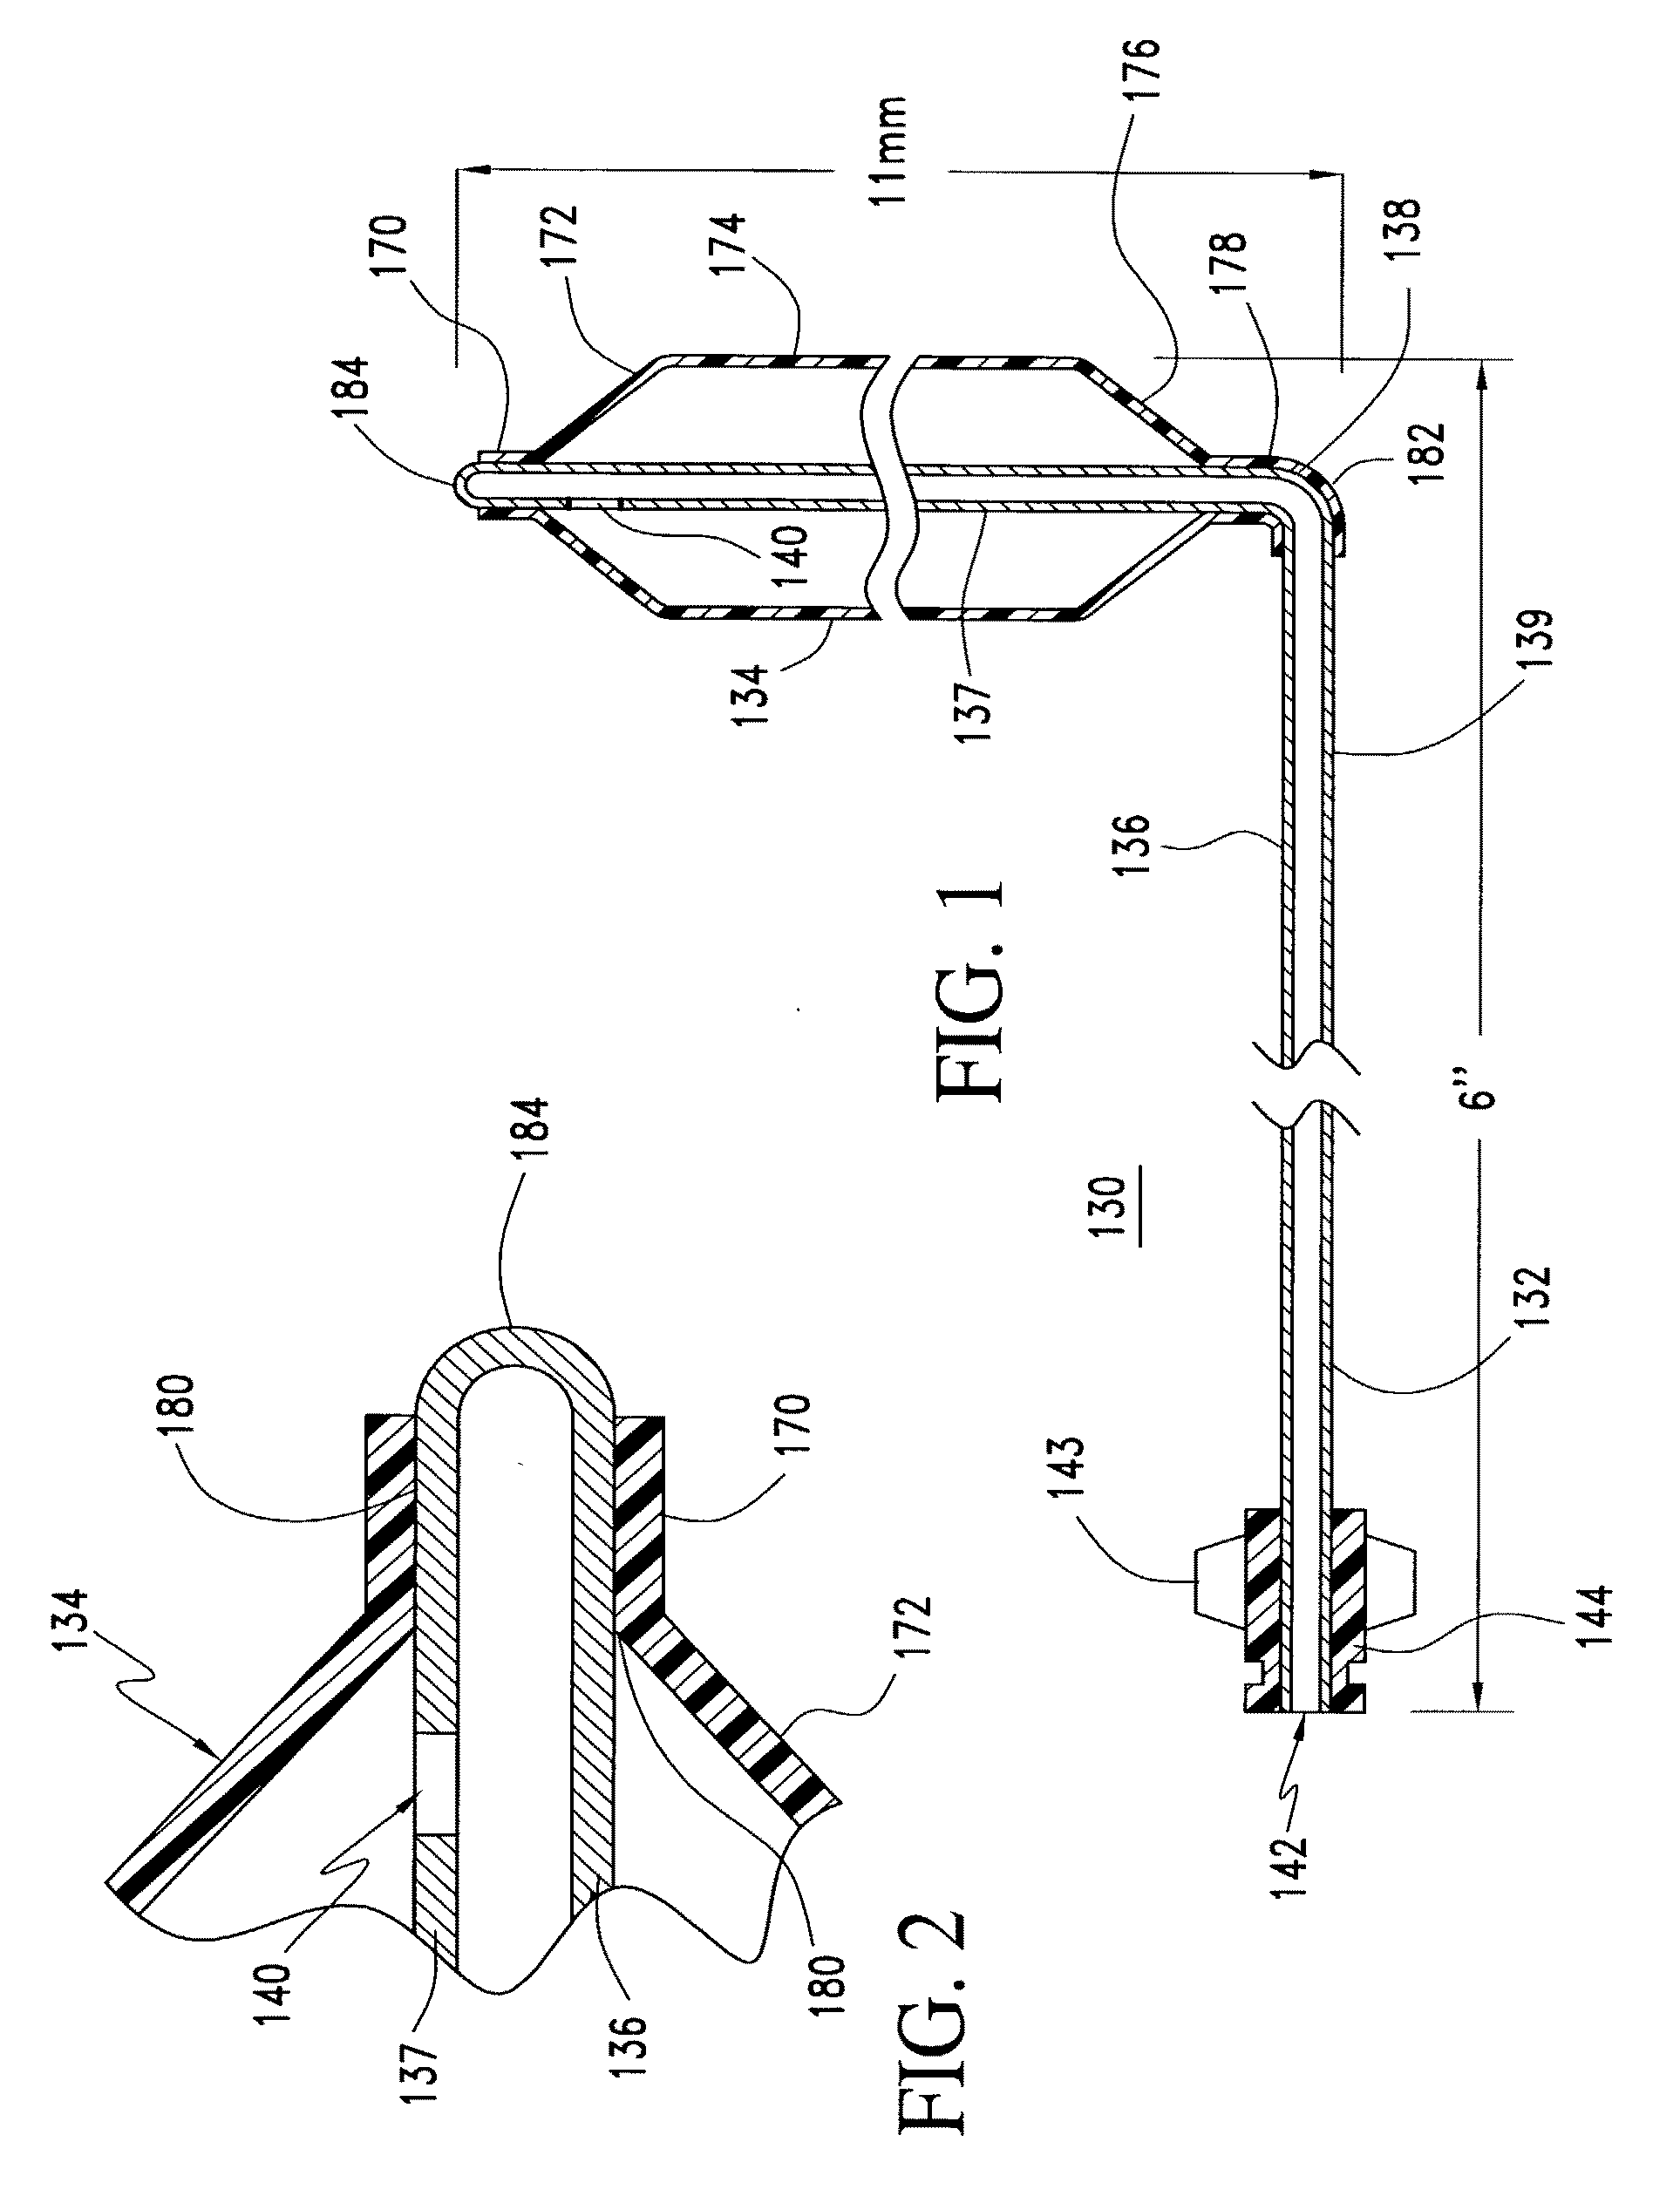 Balloon catheters and methods for treating paranasal sinuses